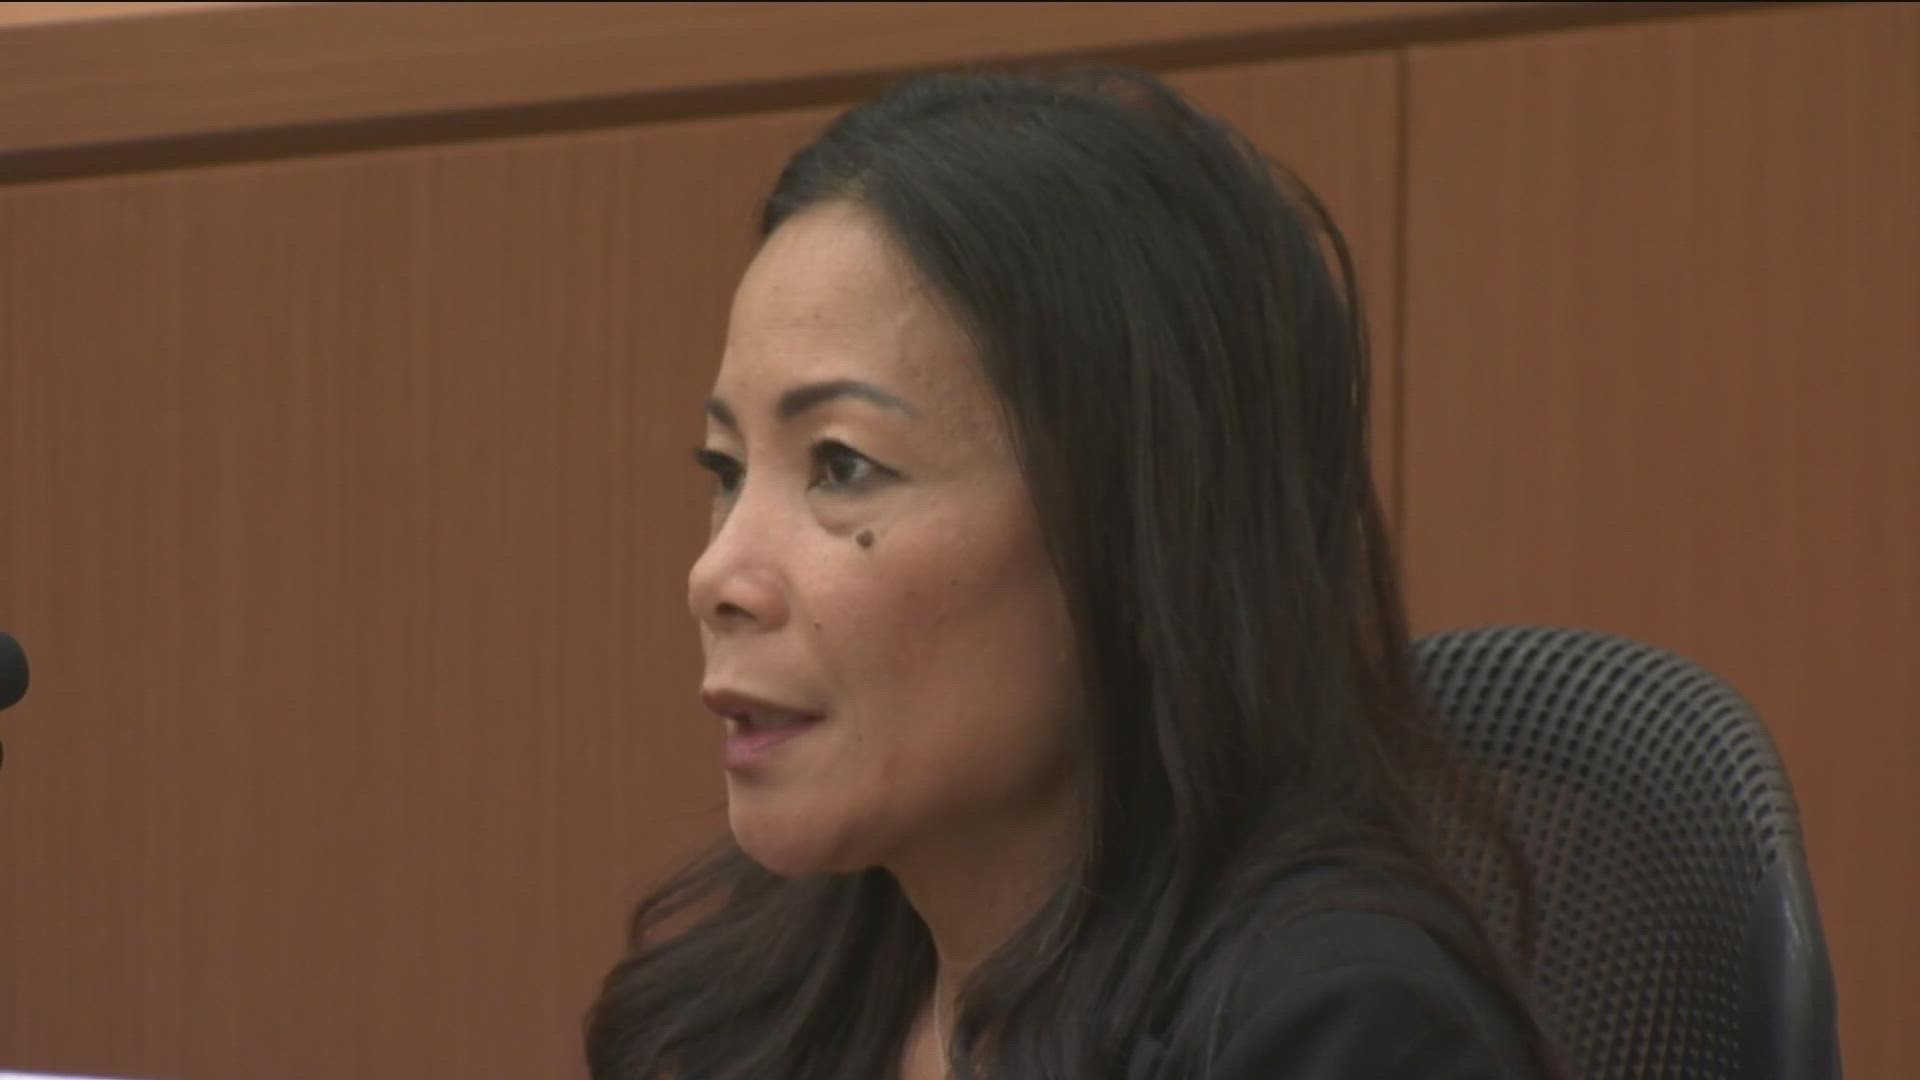 On Wednesday, Maricris Drouaillet took the stand in Downtown San Diego court.